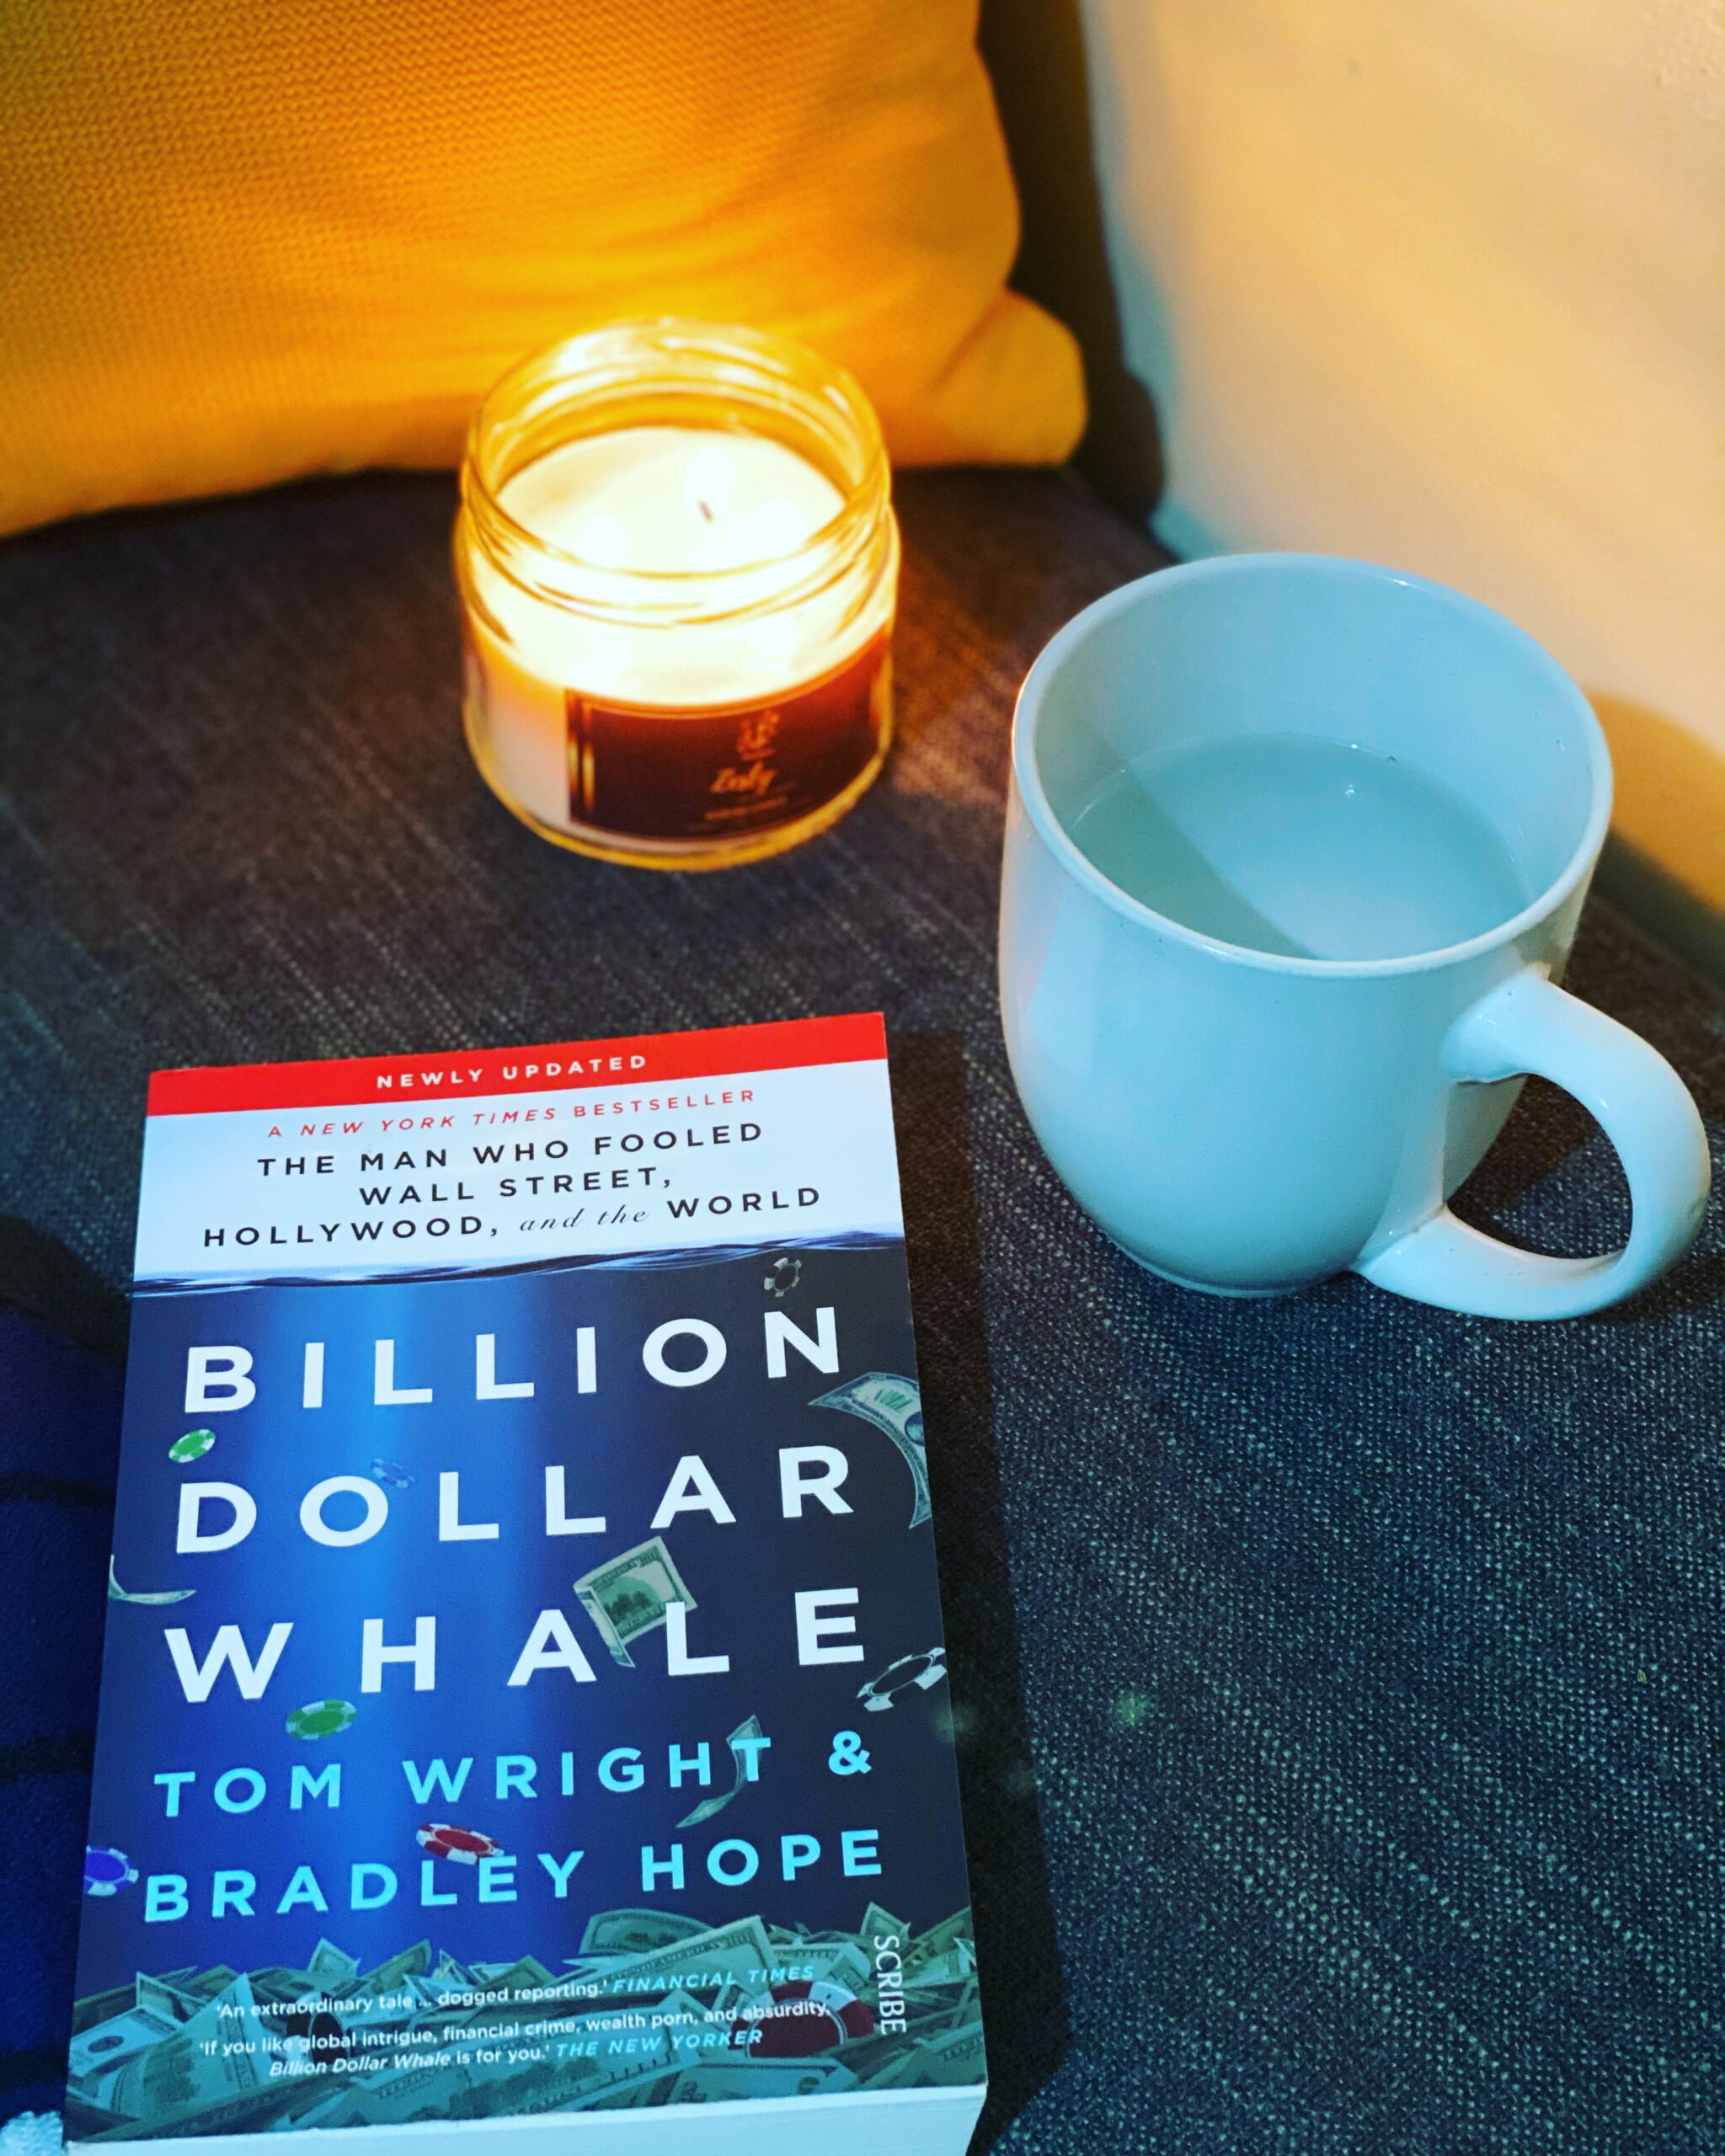 Copy of Billion Dollar Whale with a cup of water and a scented candle on the side